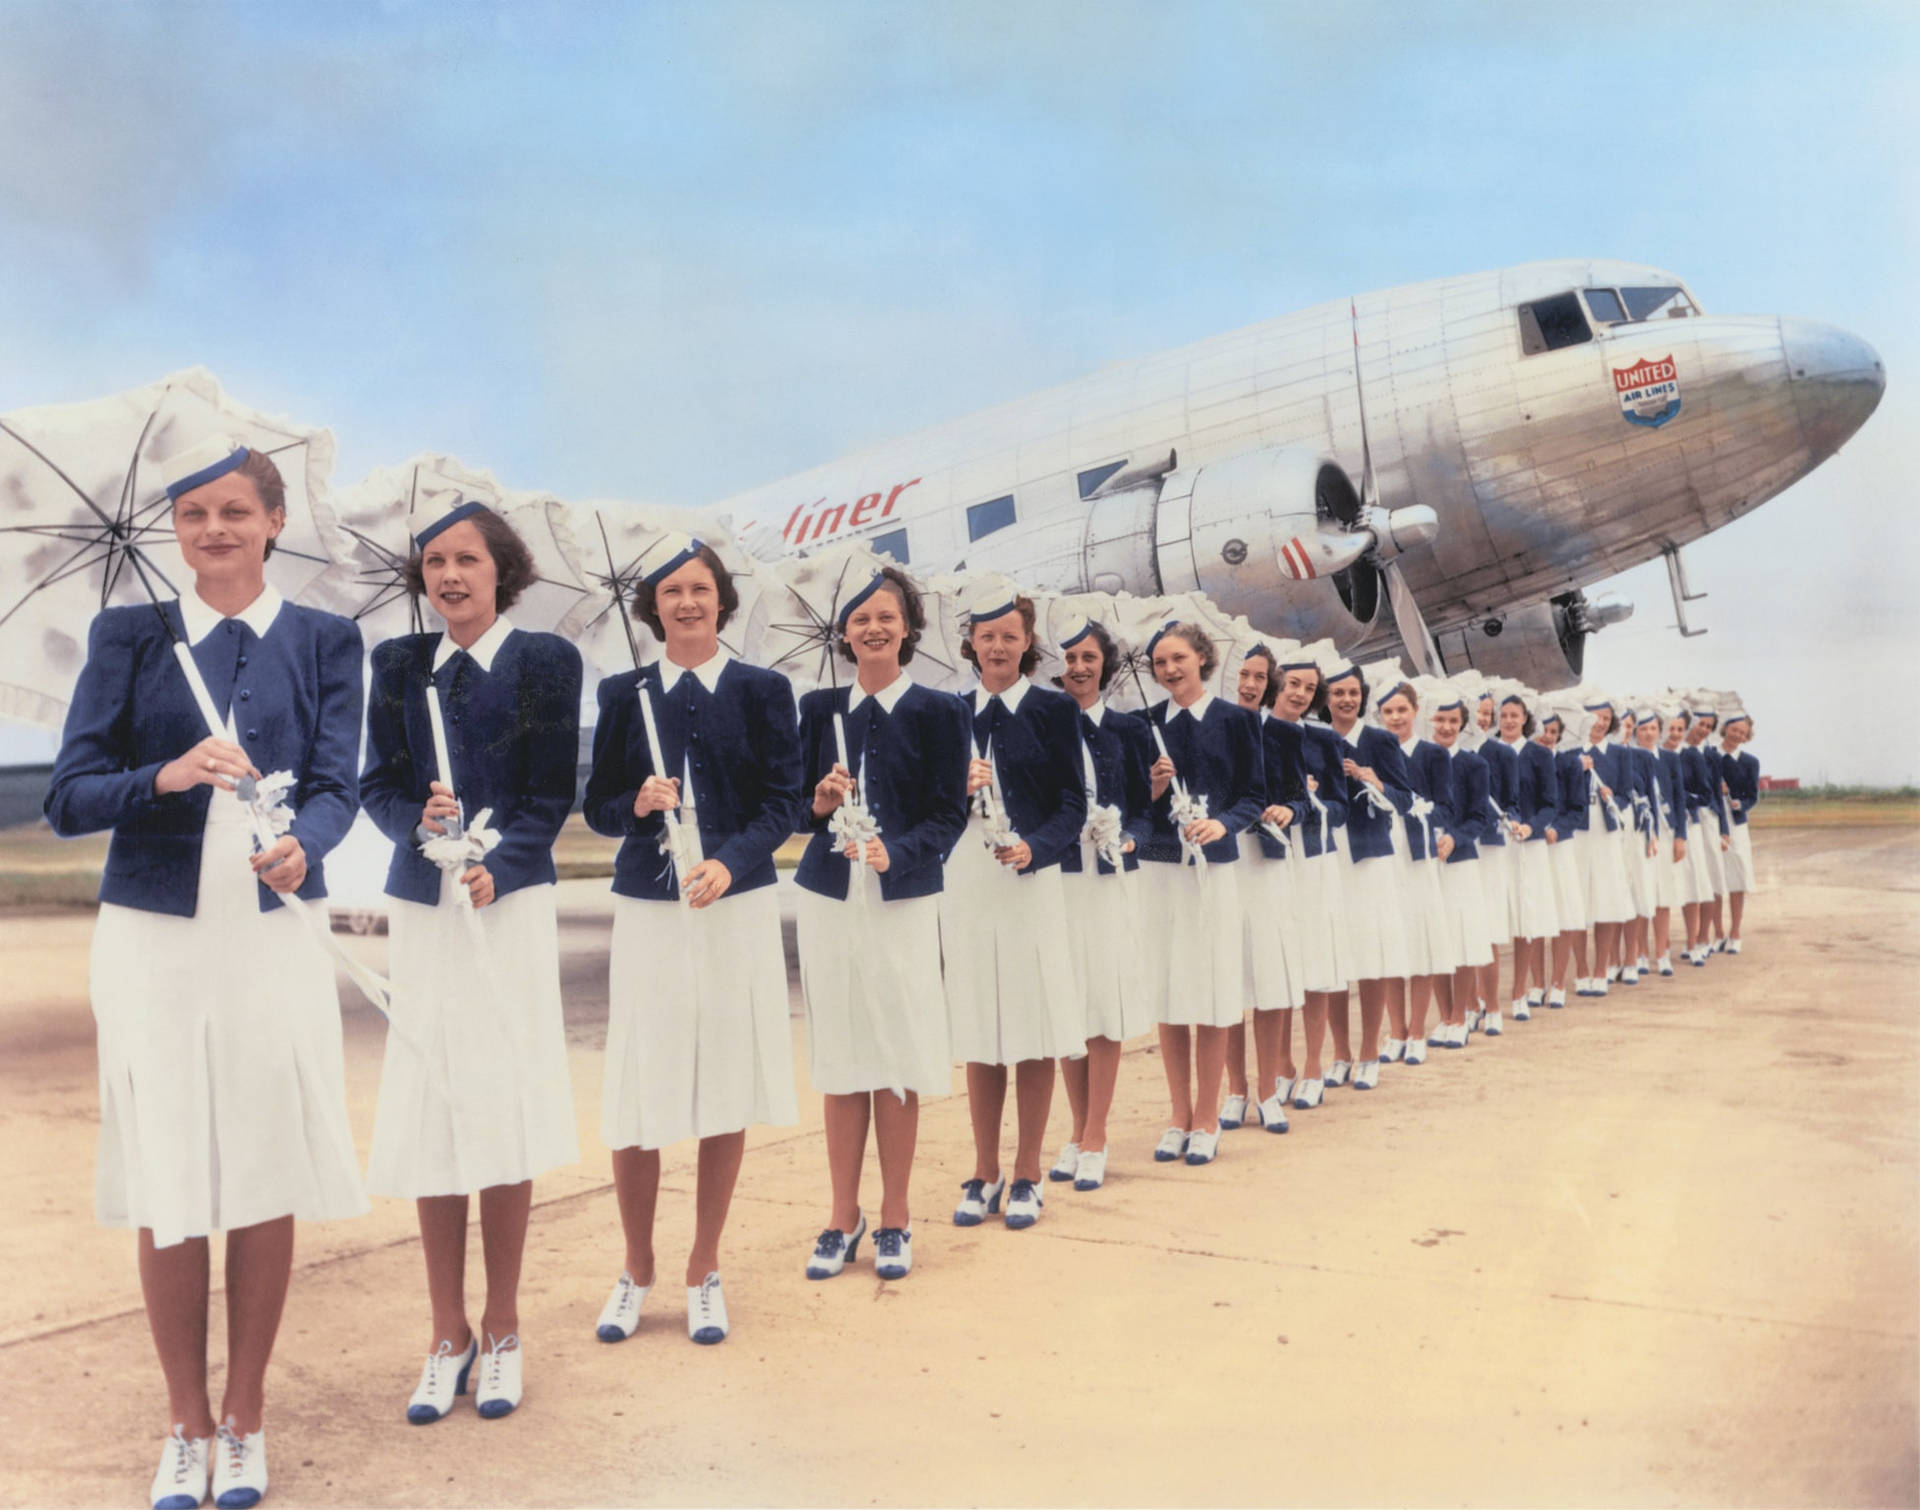 Classic Era of Aviation with Trans World Airlines Flight Attendants Wallpaper